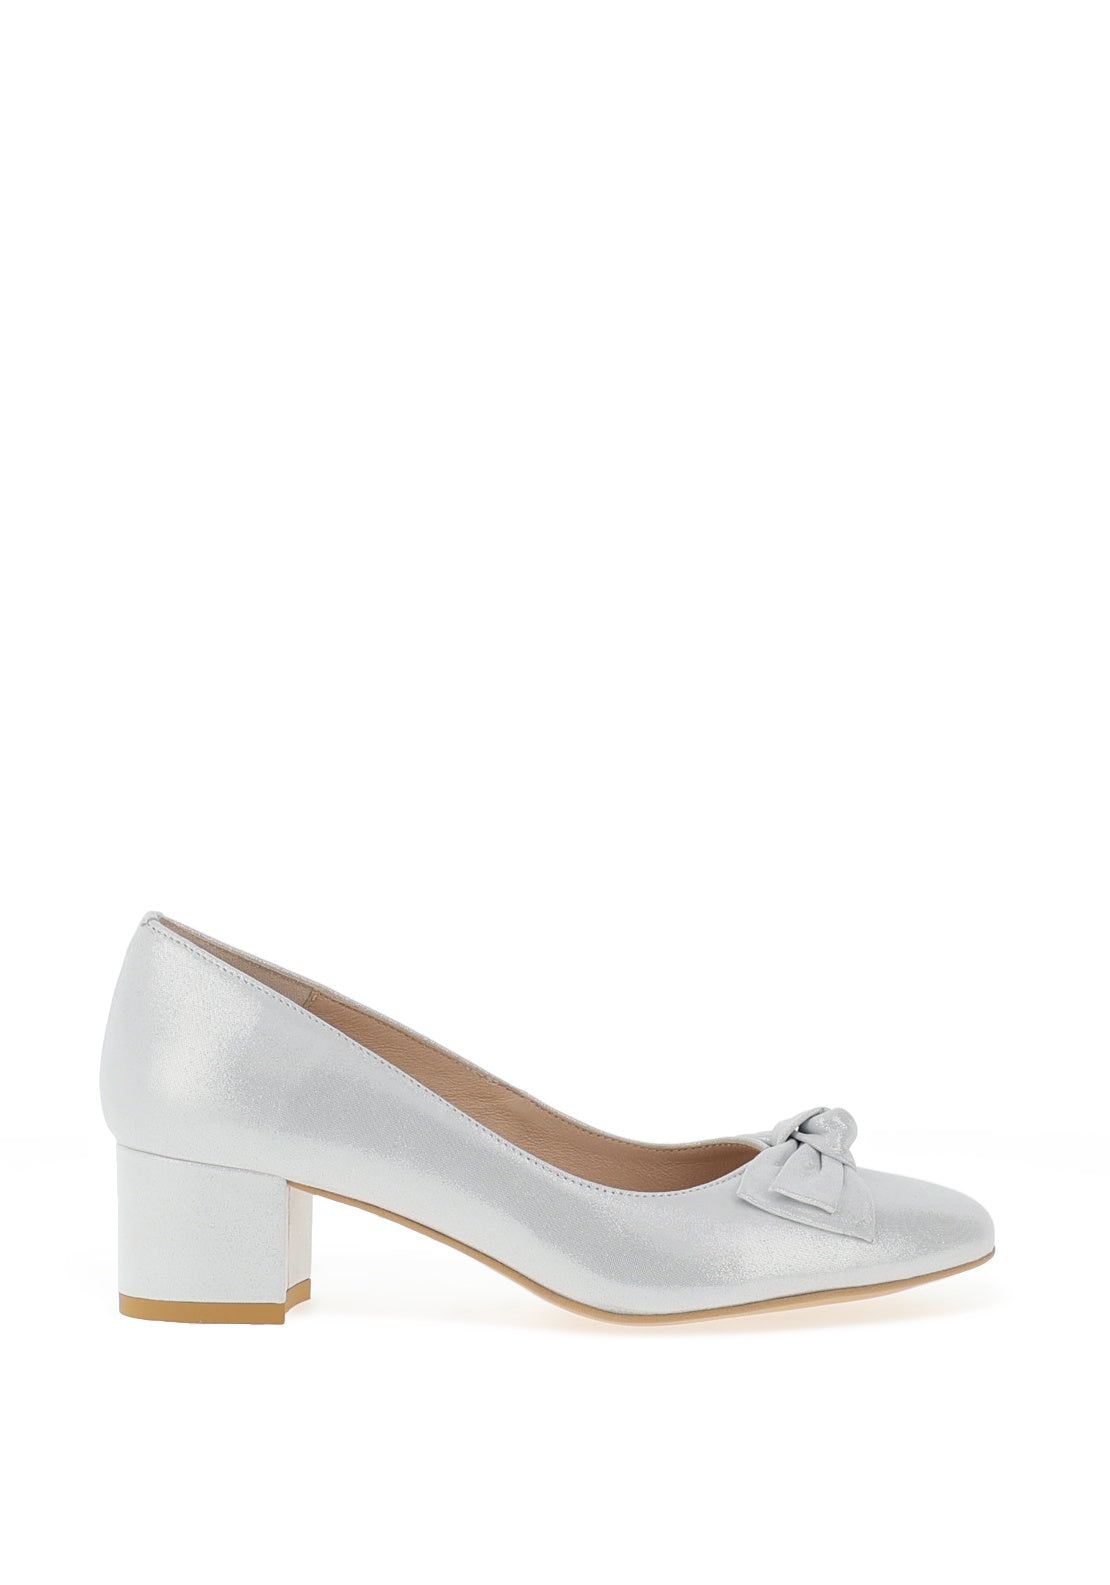 Emis Leather Shimmer Bow Block Heel Shoes, White Silver - McElhinneys